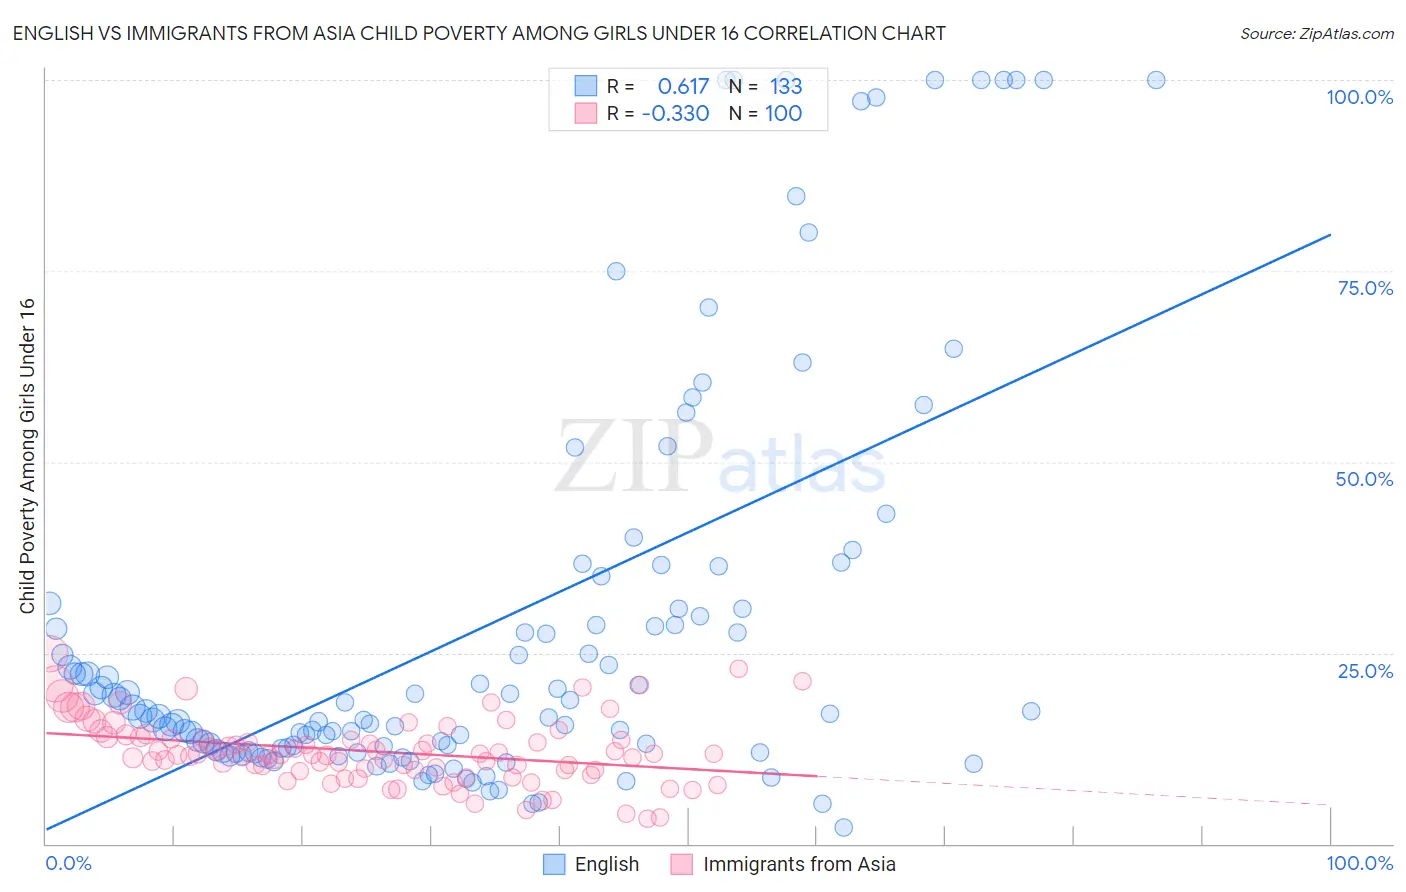 English vs Immigrants from Asia Child Poverty Among Girls Under 16